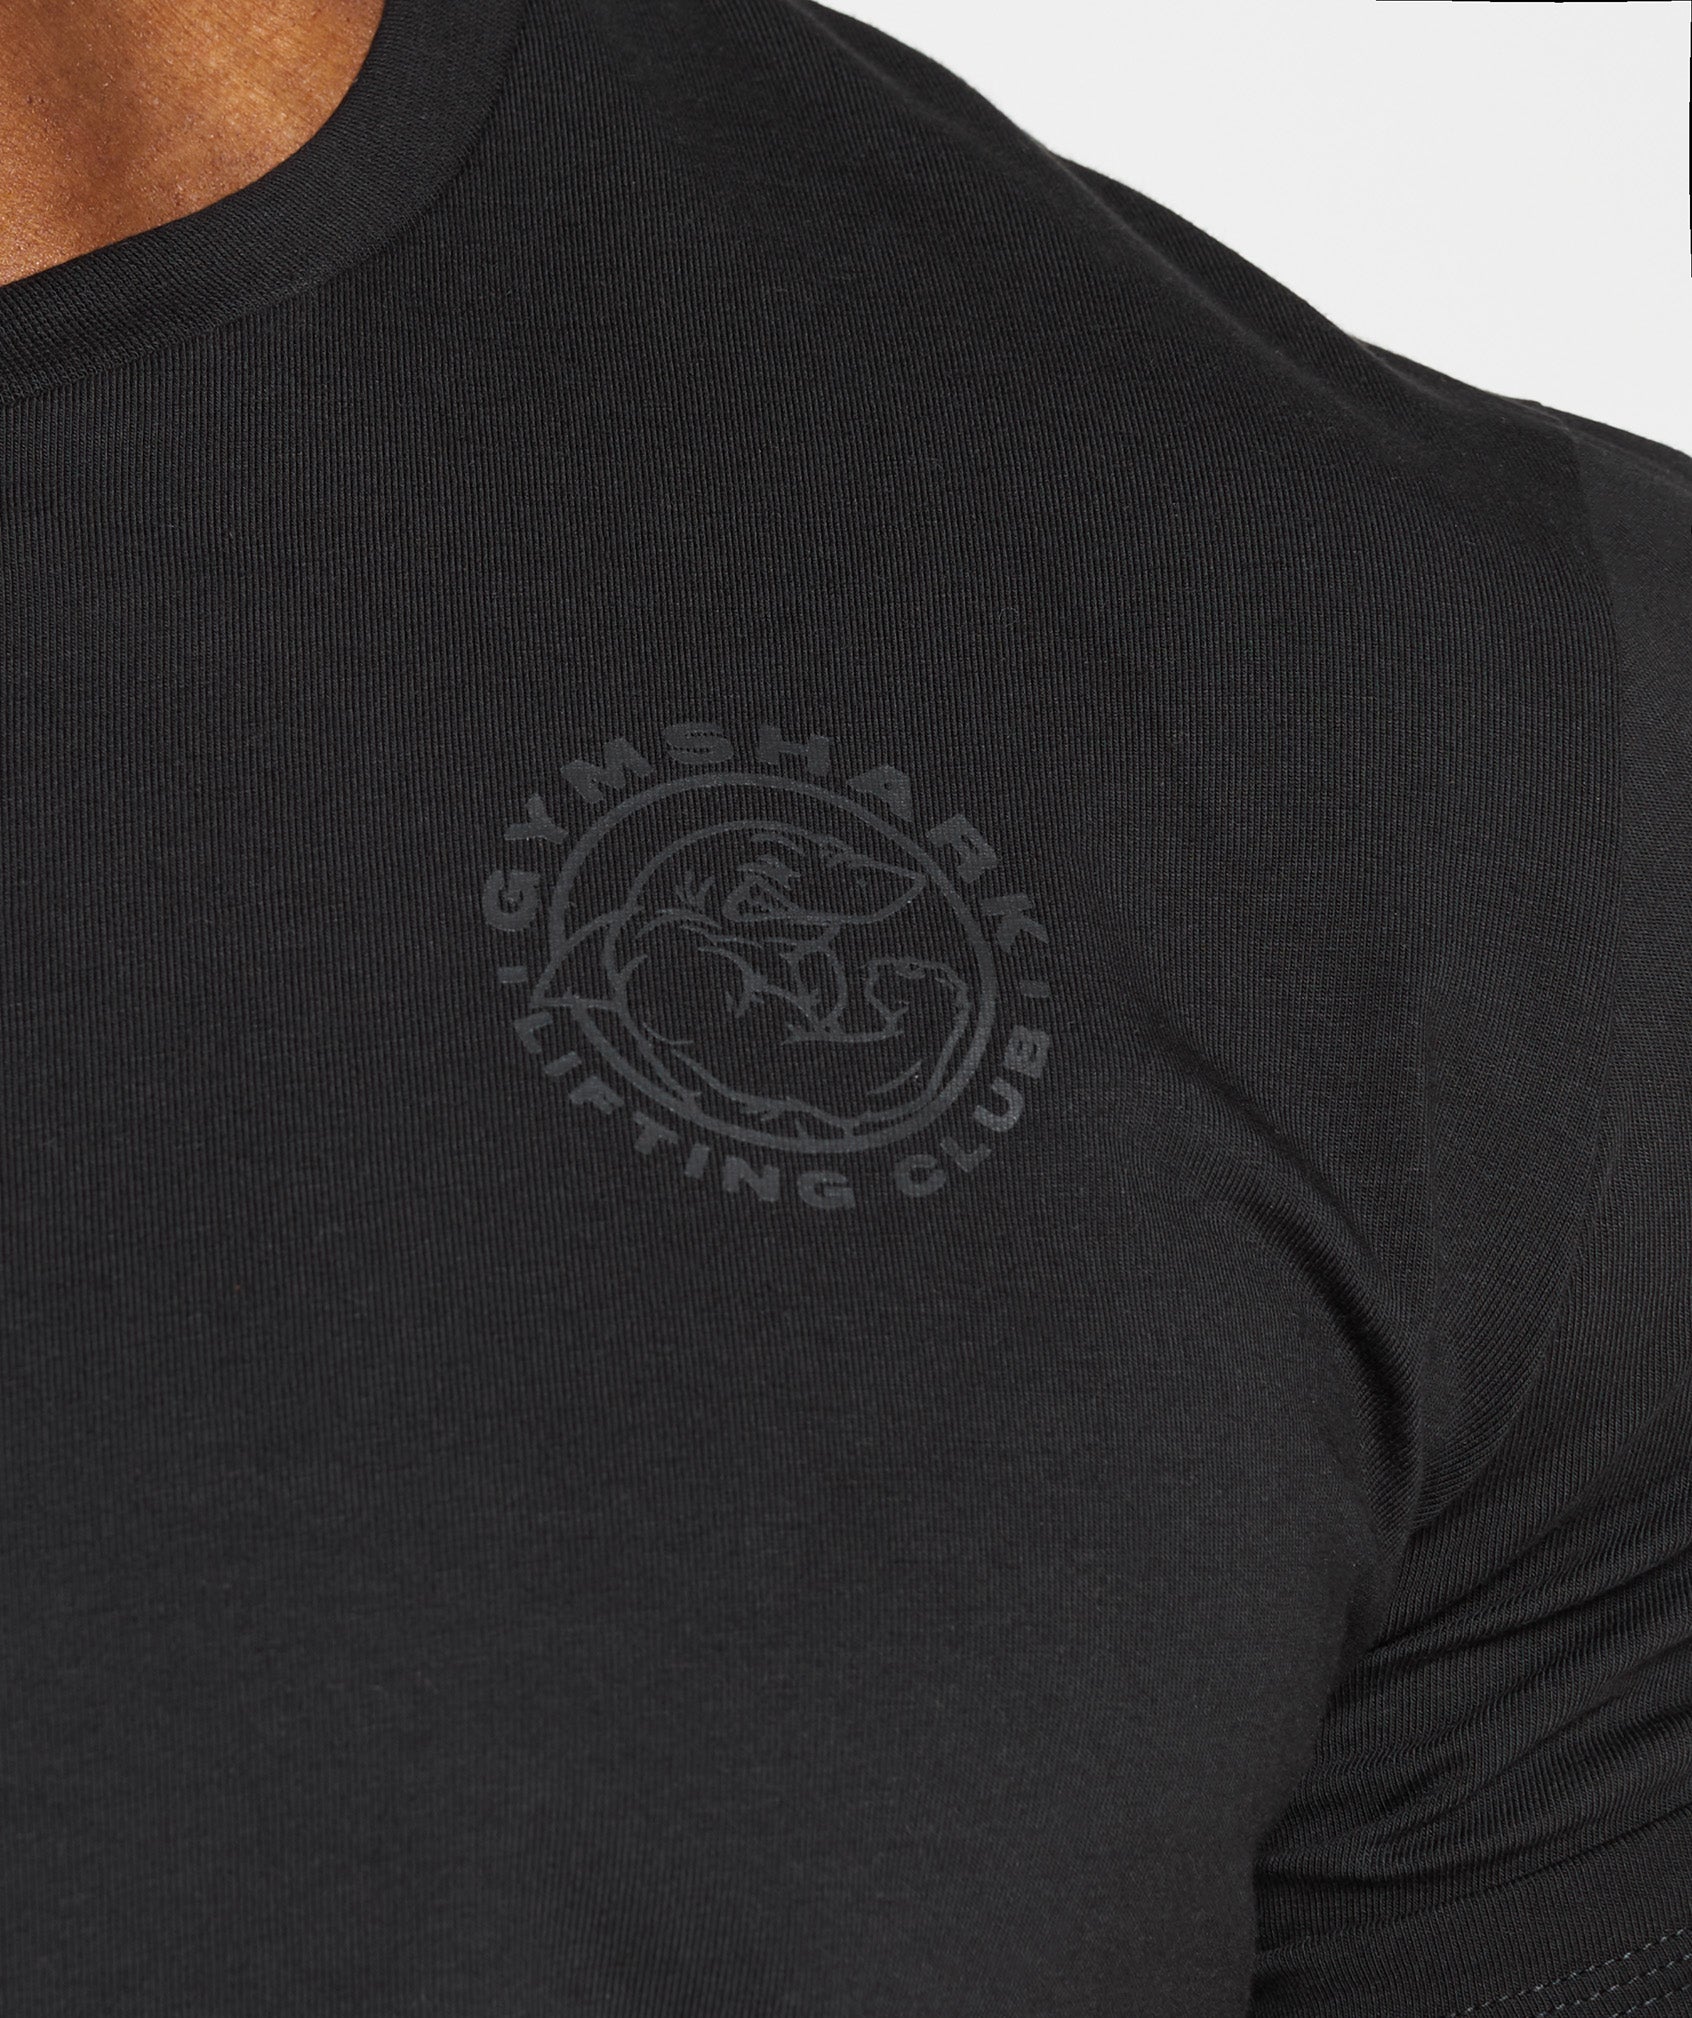 Legacy T-Shirt in Black - view 6